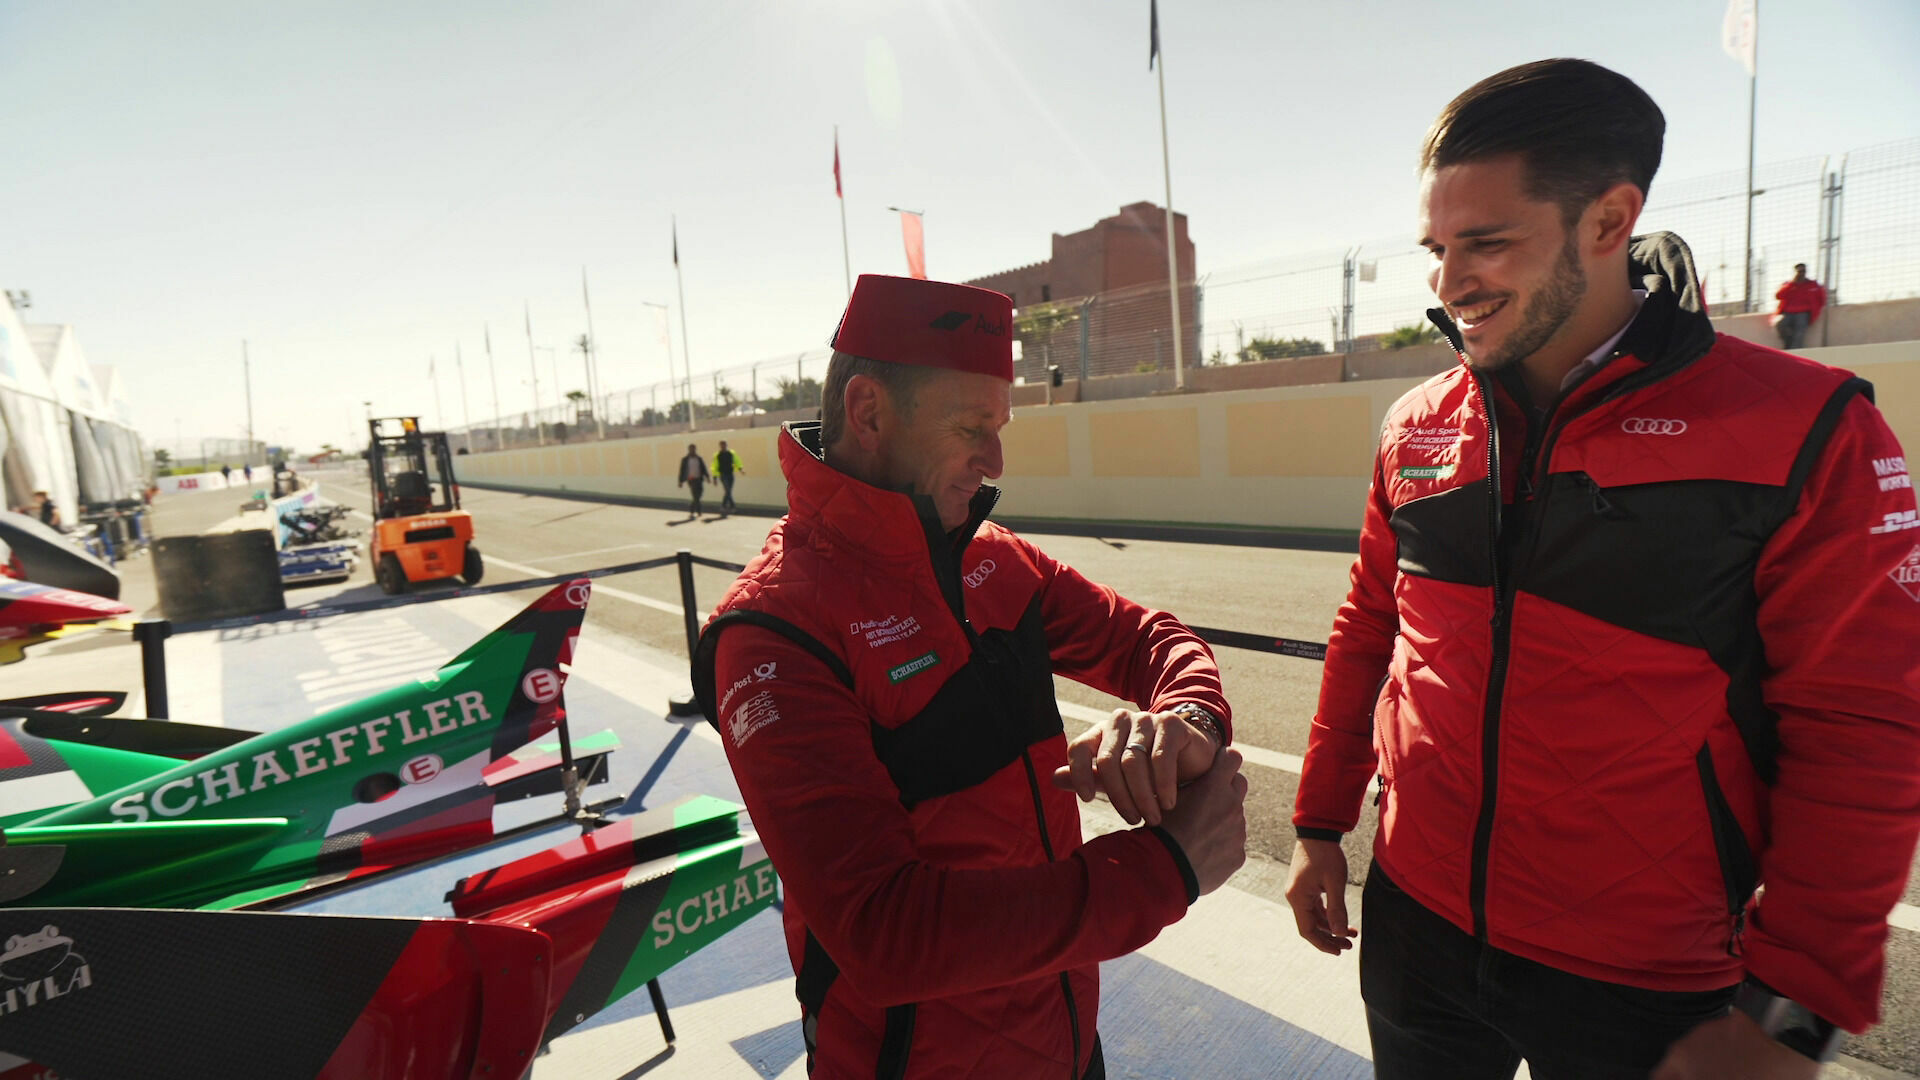 Welcome to Marrakesh: Shopping for the Team Principal